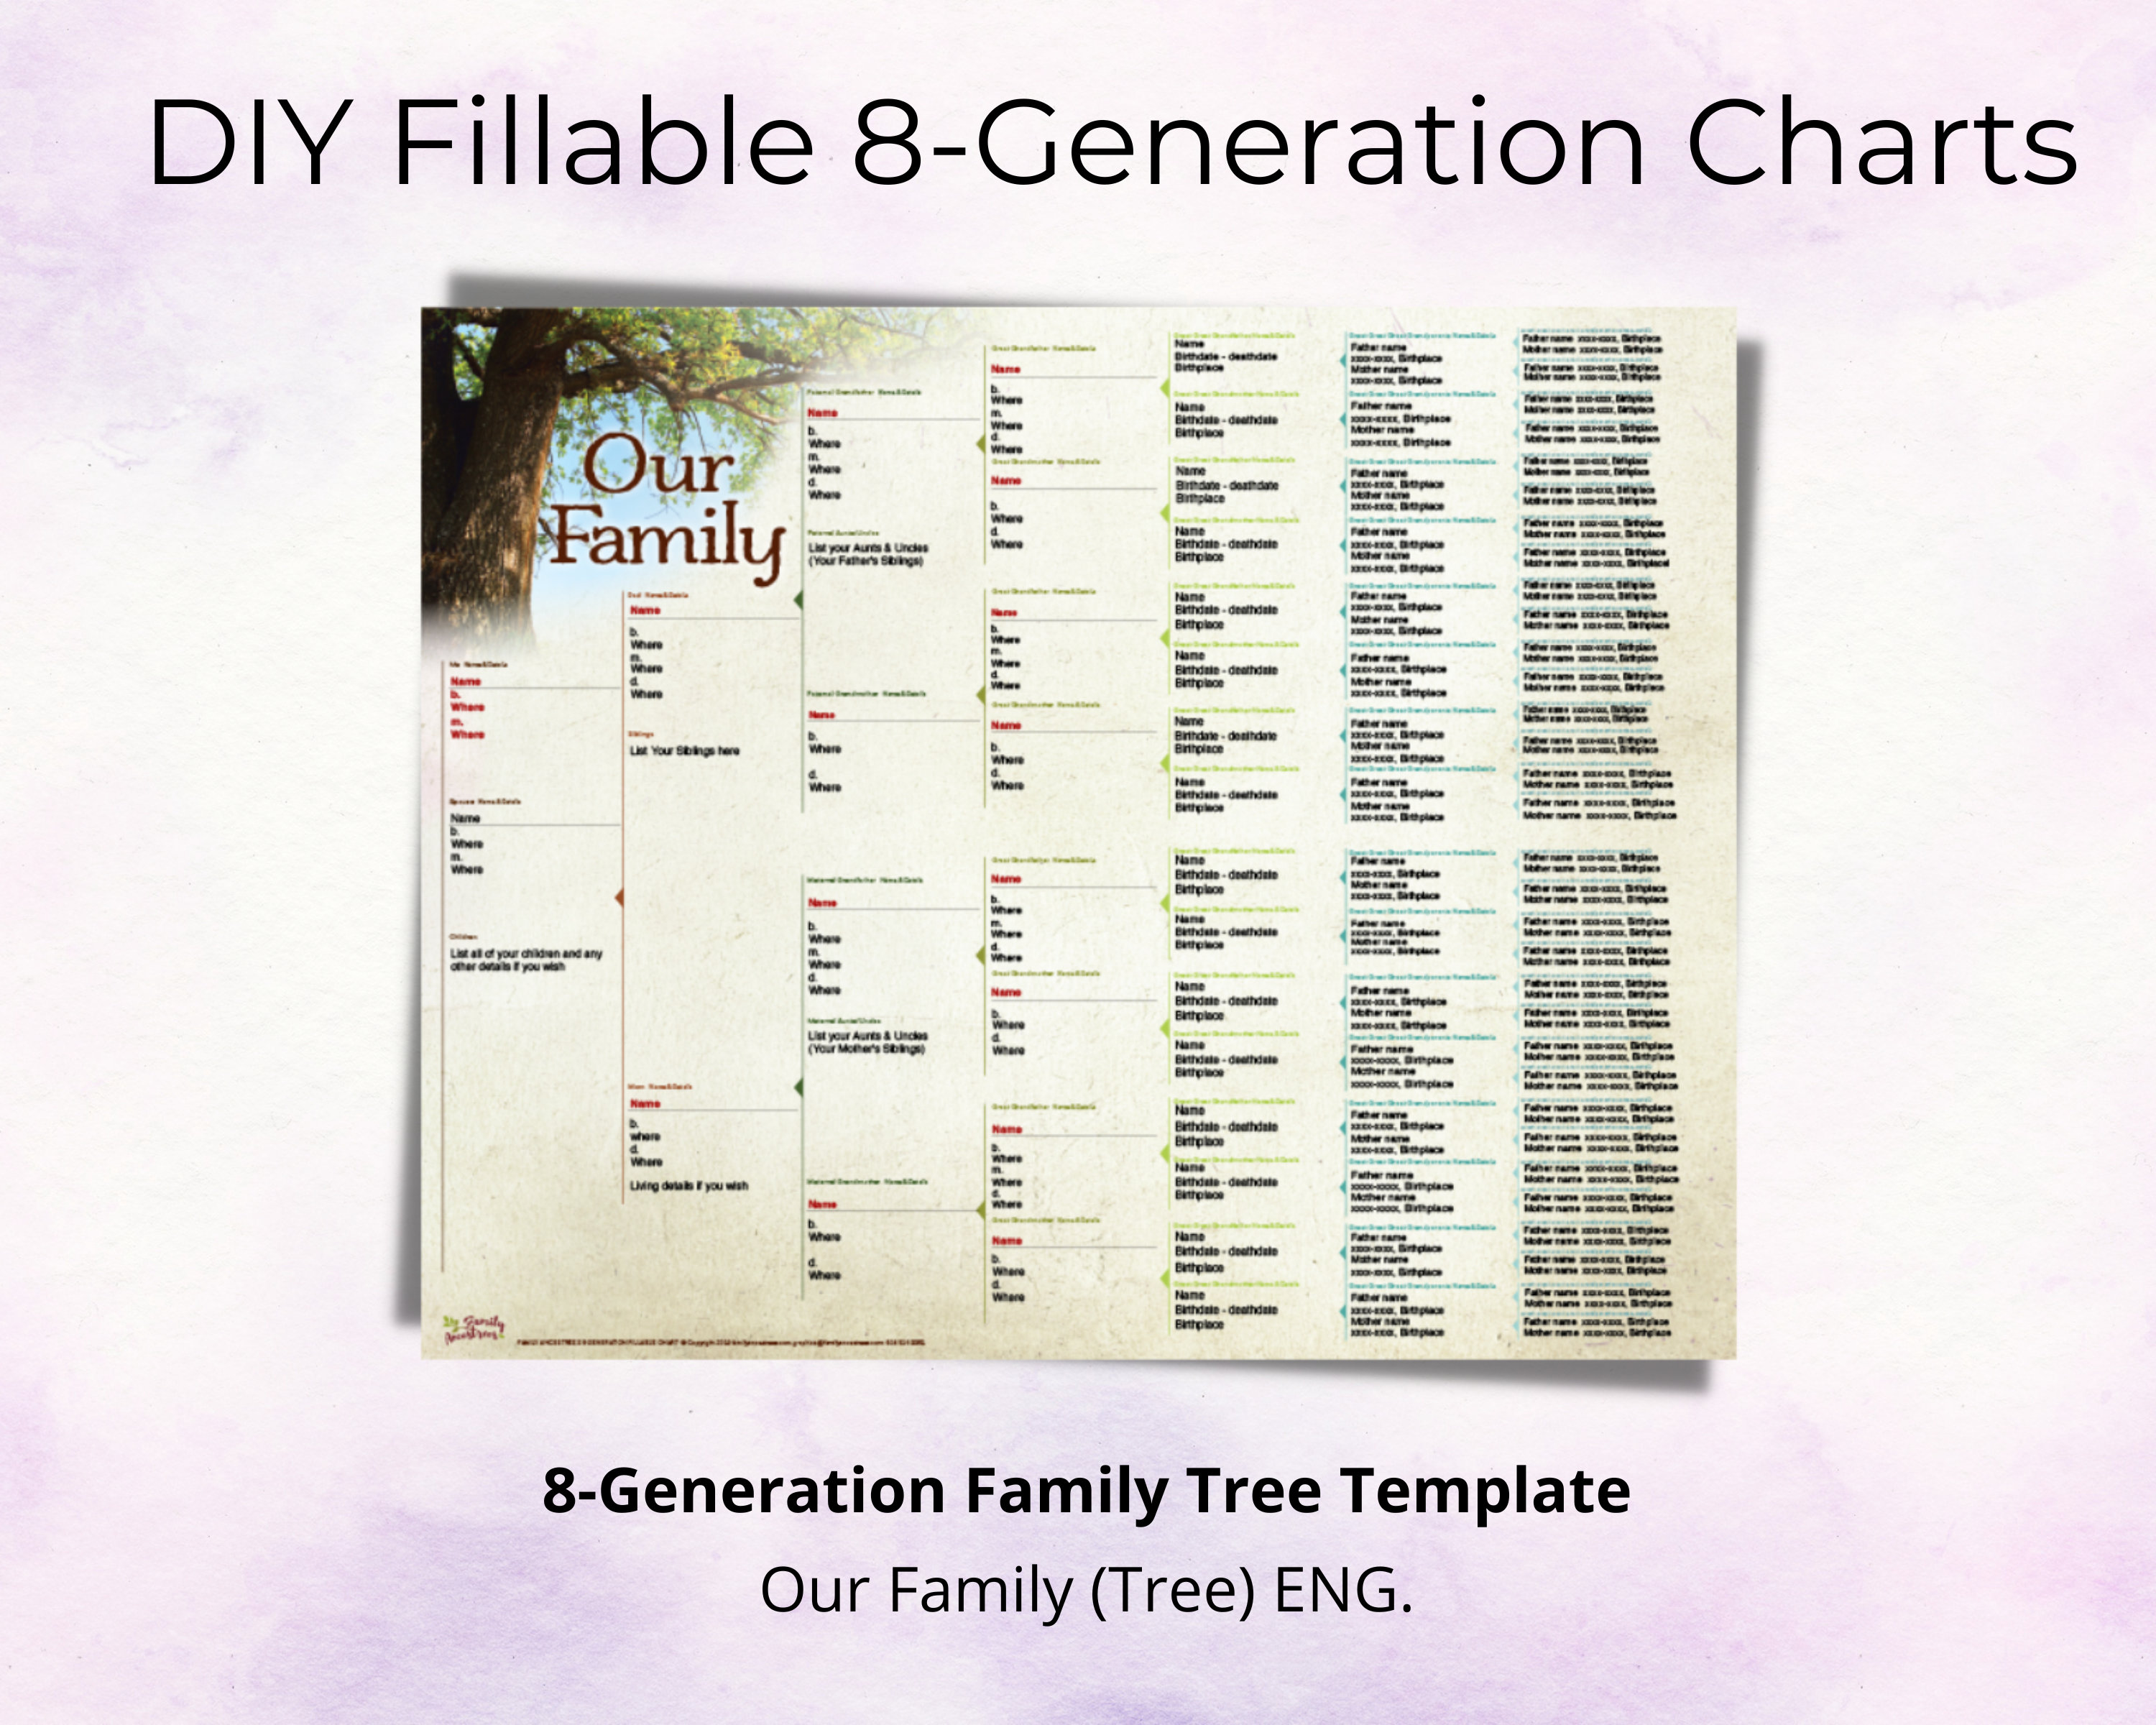 Palace Learning 1 Pack - Family Tree Chart To Fill In - 6 Generation  Genealogy Poster - Blank Fillable Ancestry Chart [Version 1] - 18 x 24